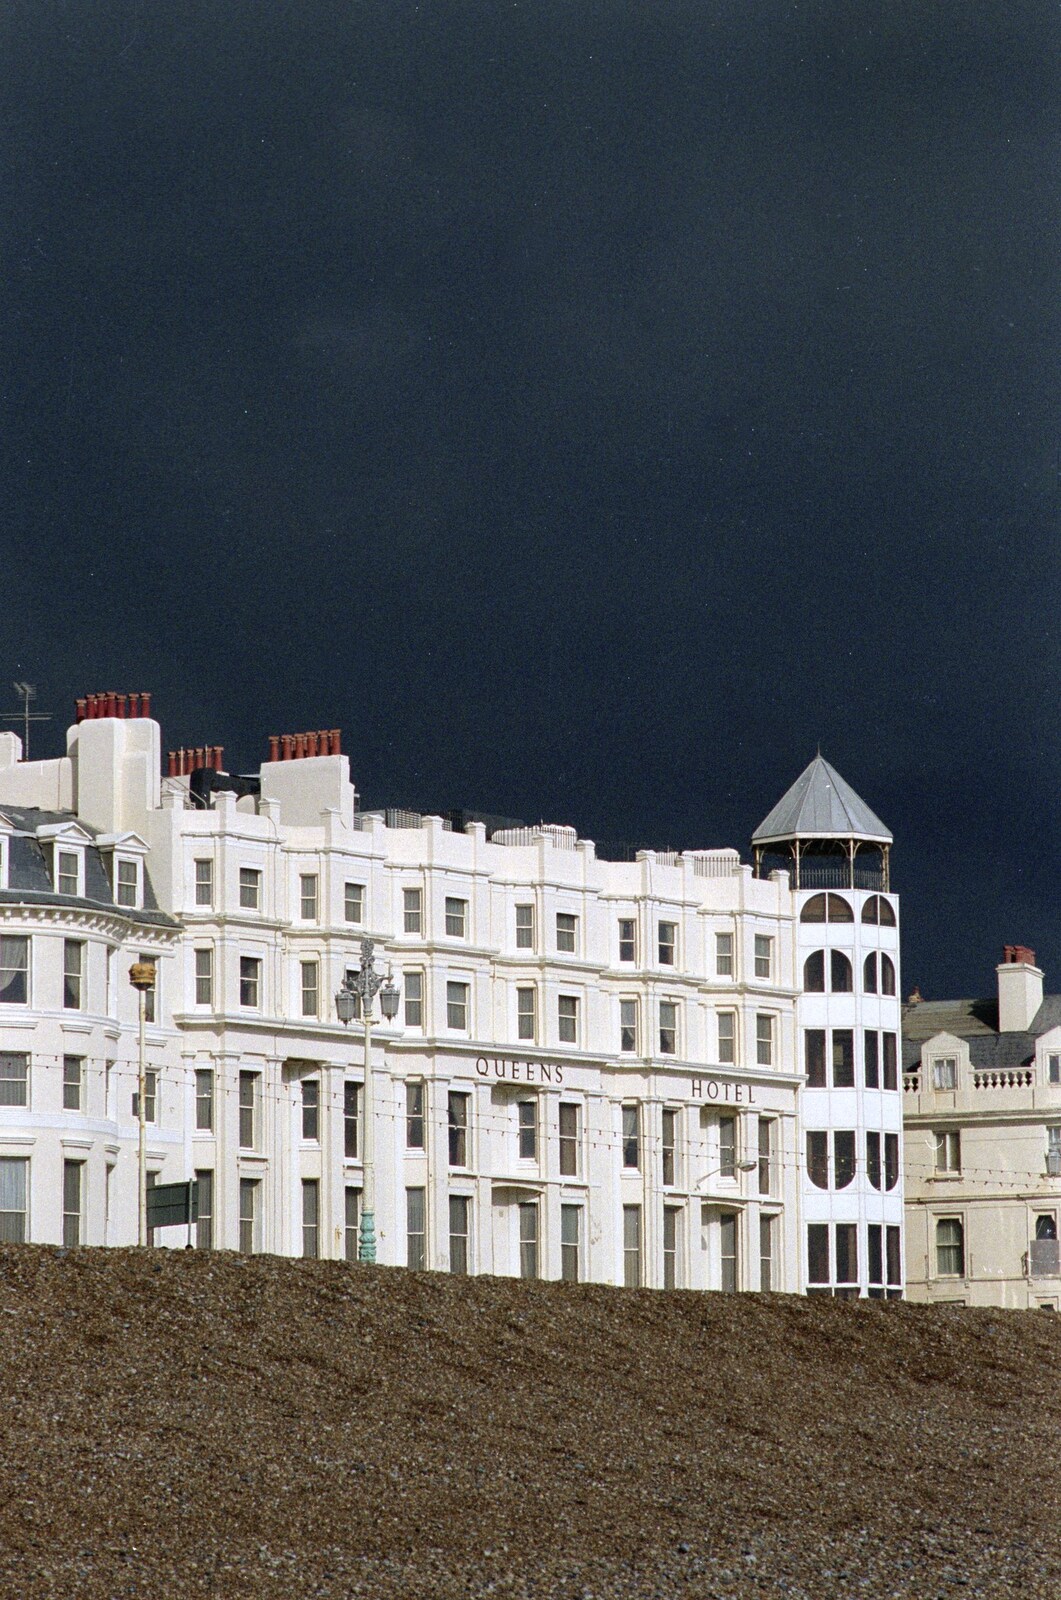 The Queens Hotel, and some dark skies from Brighton Rock: Visiting Riki and John, Brighton, East Sussex - 5th March 1990